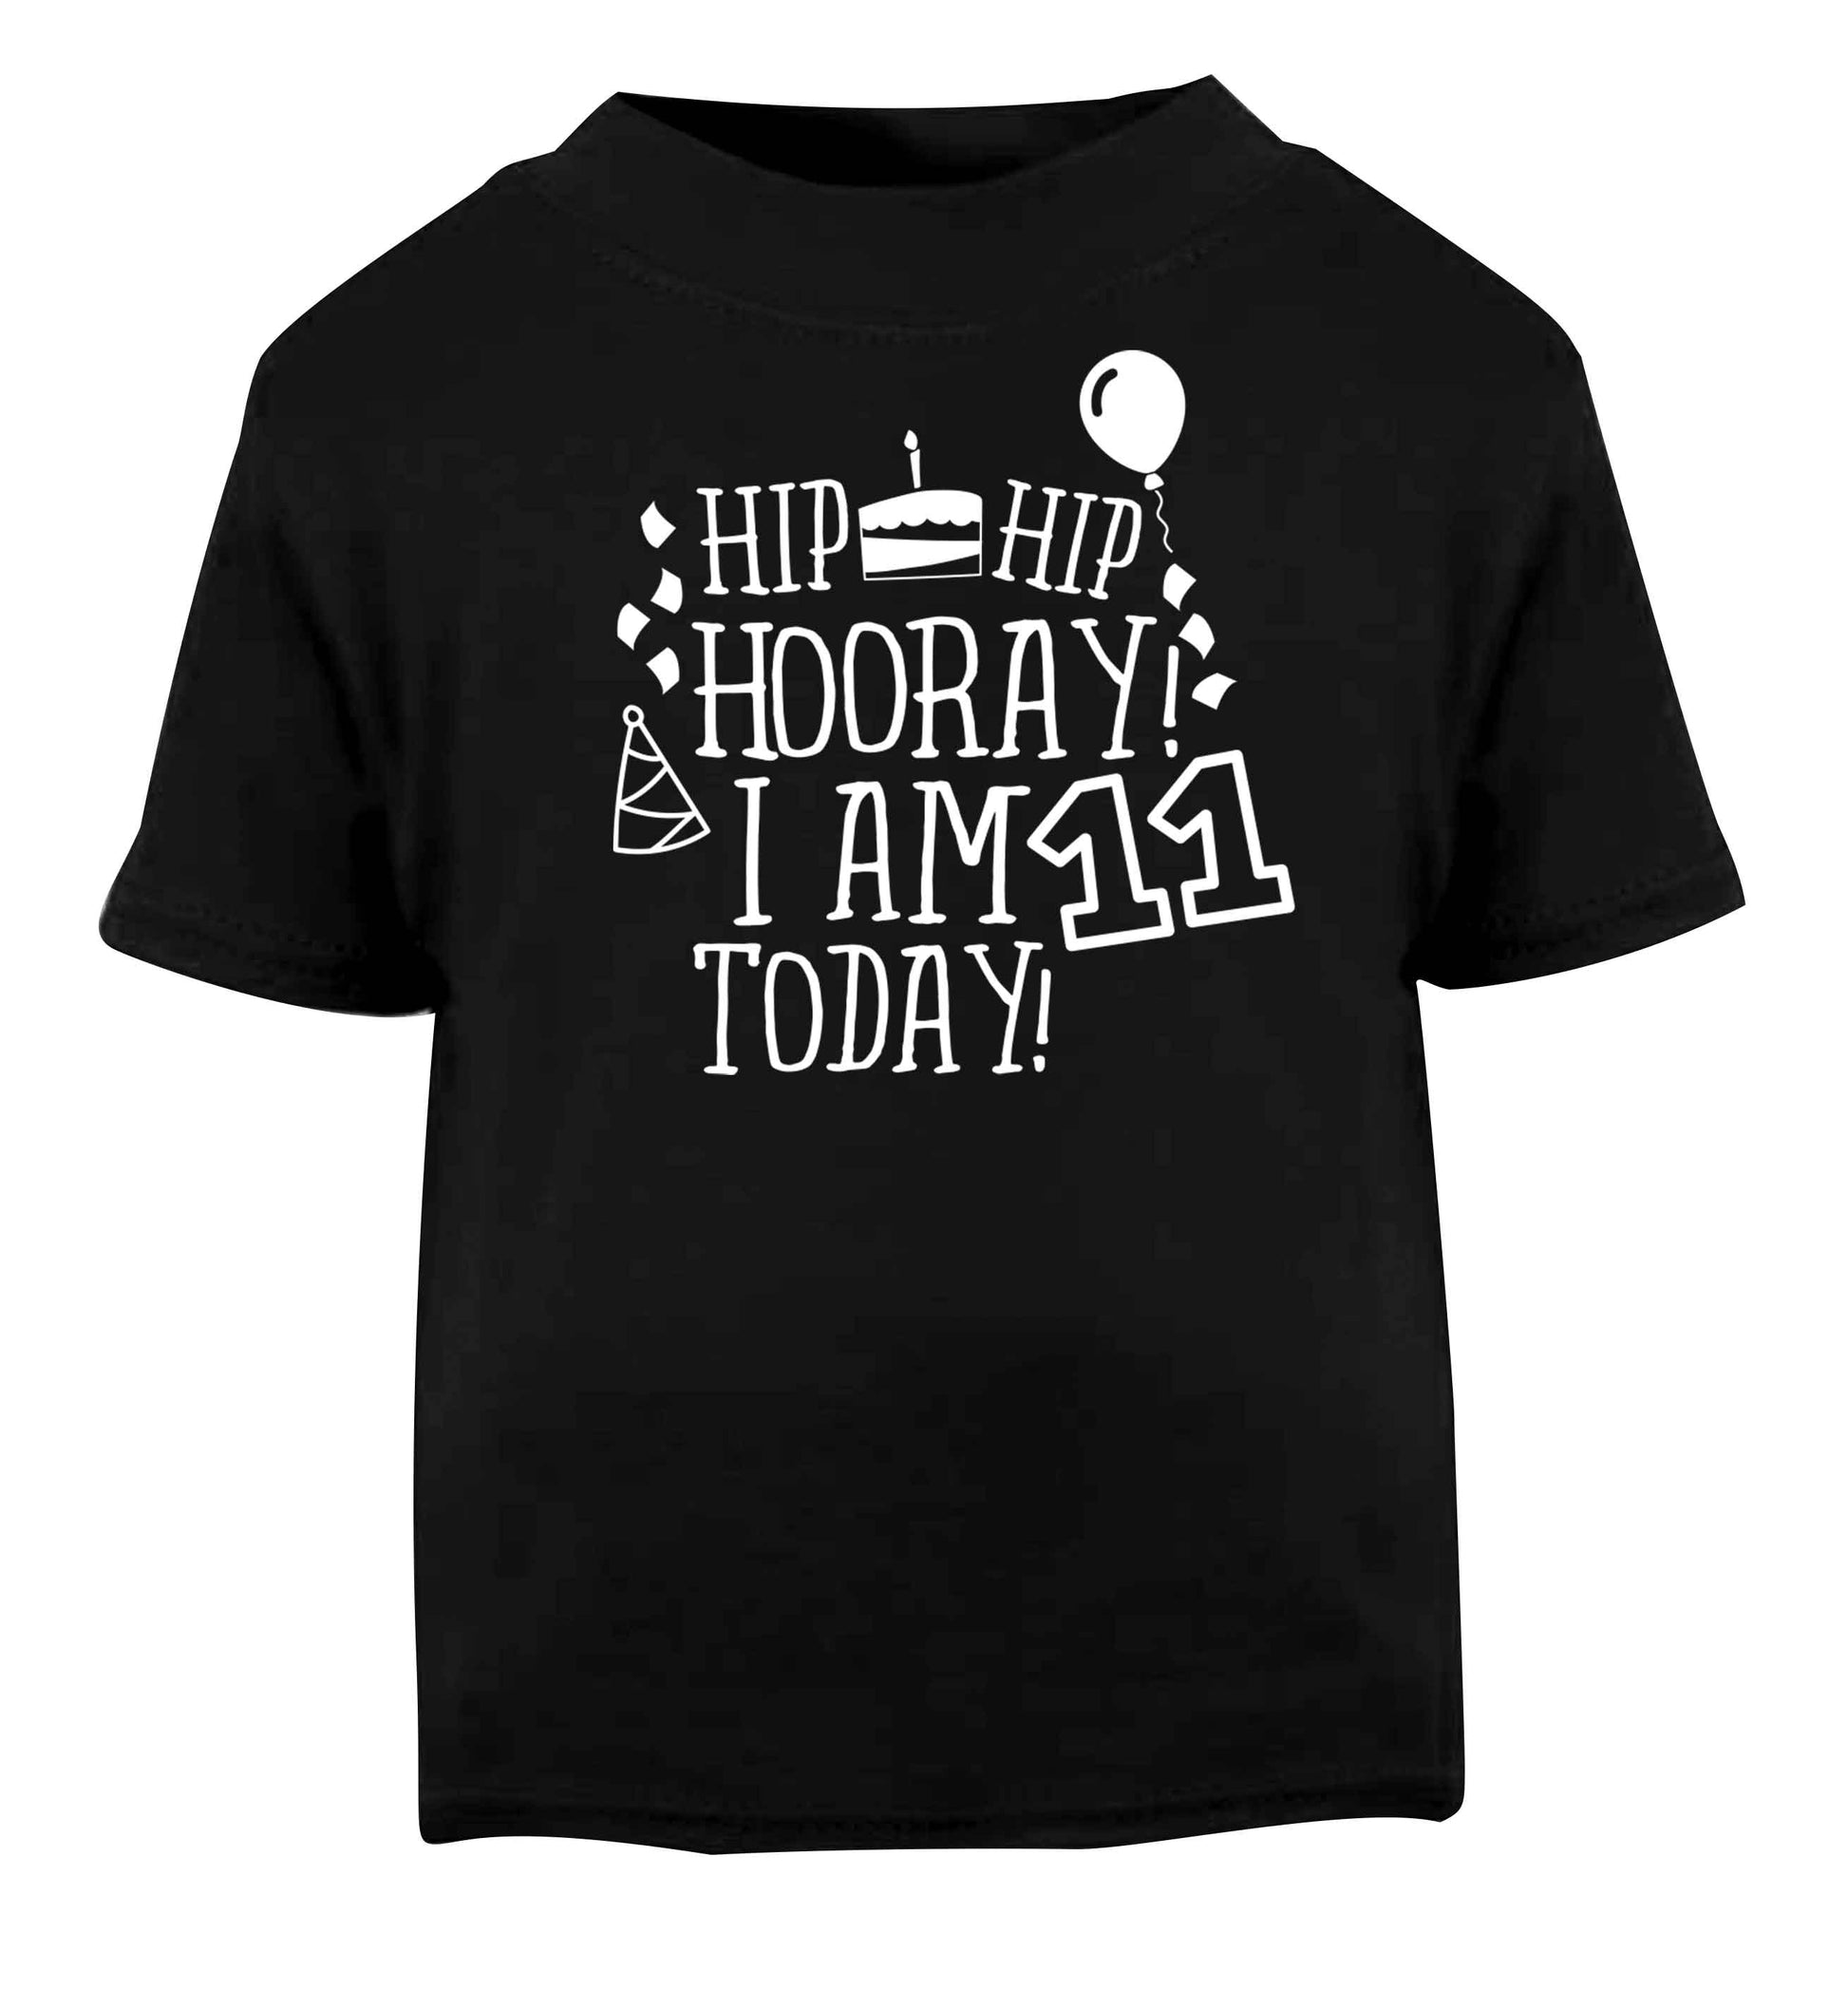 Hip hip hooray I am eleven today! Black baby toddler Tshirt 2 years